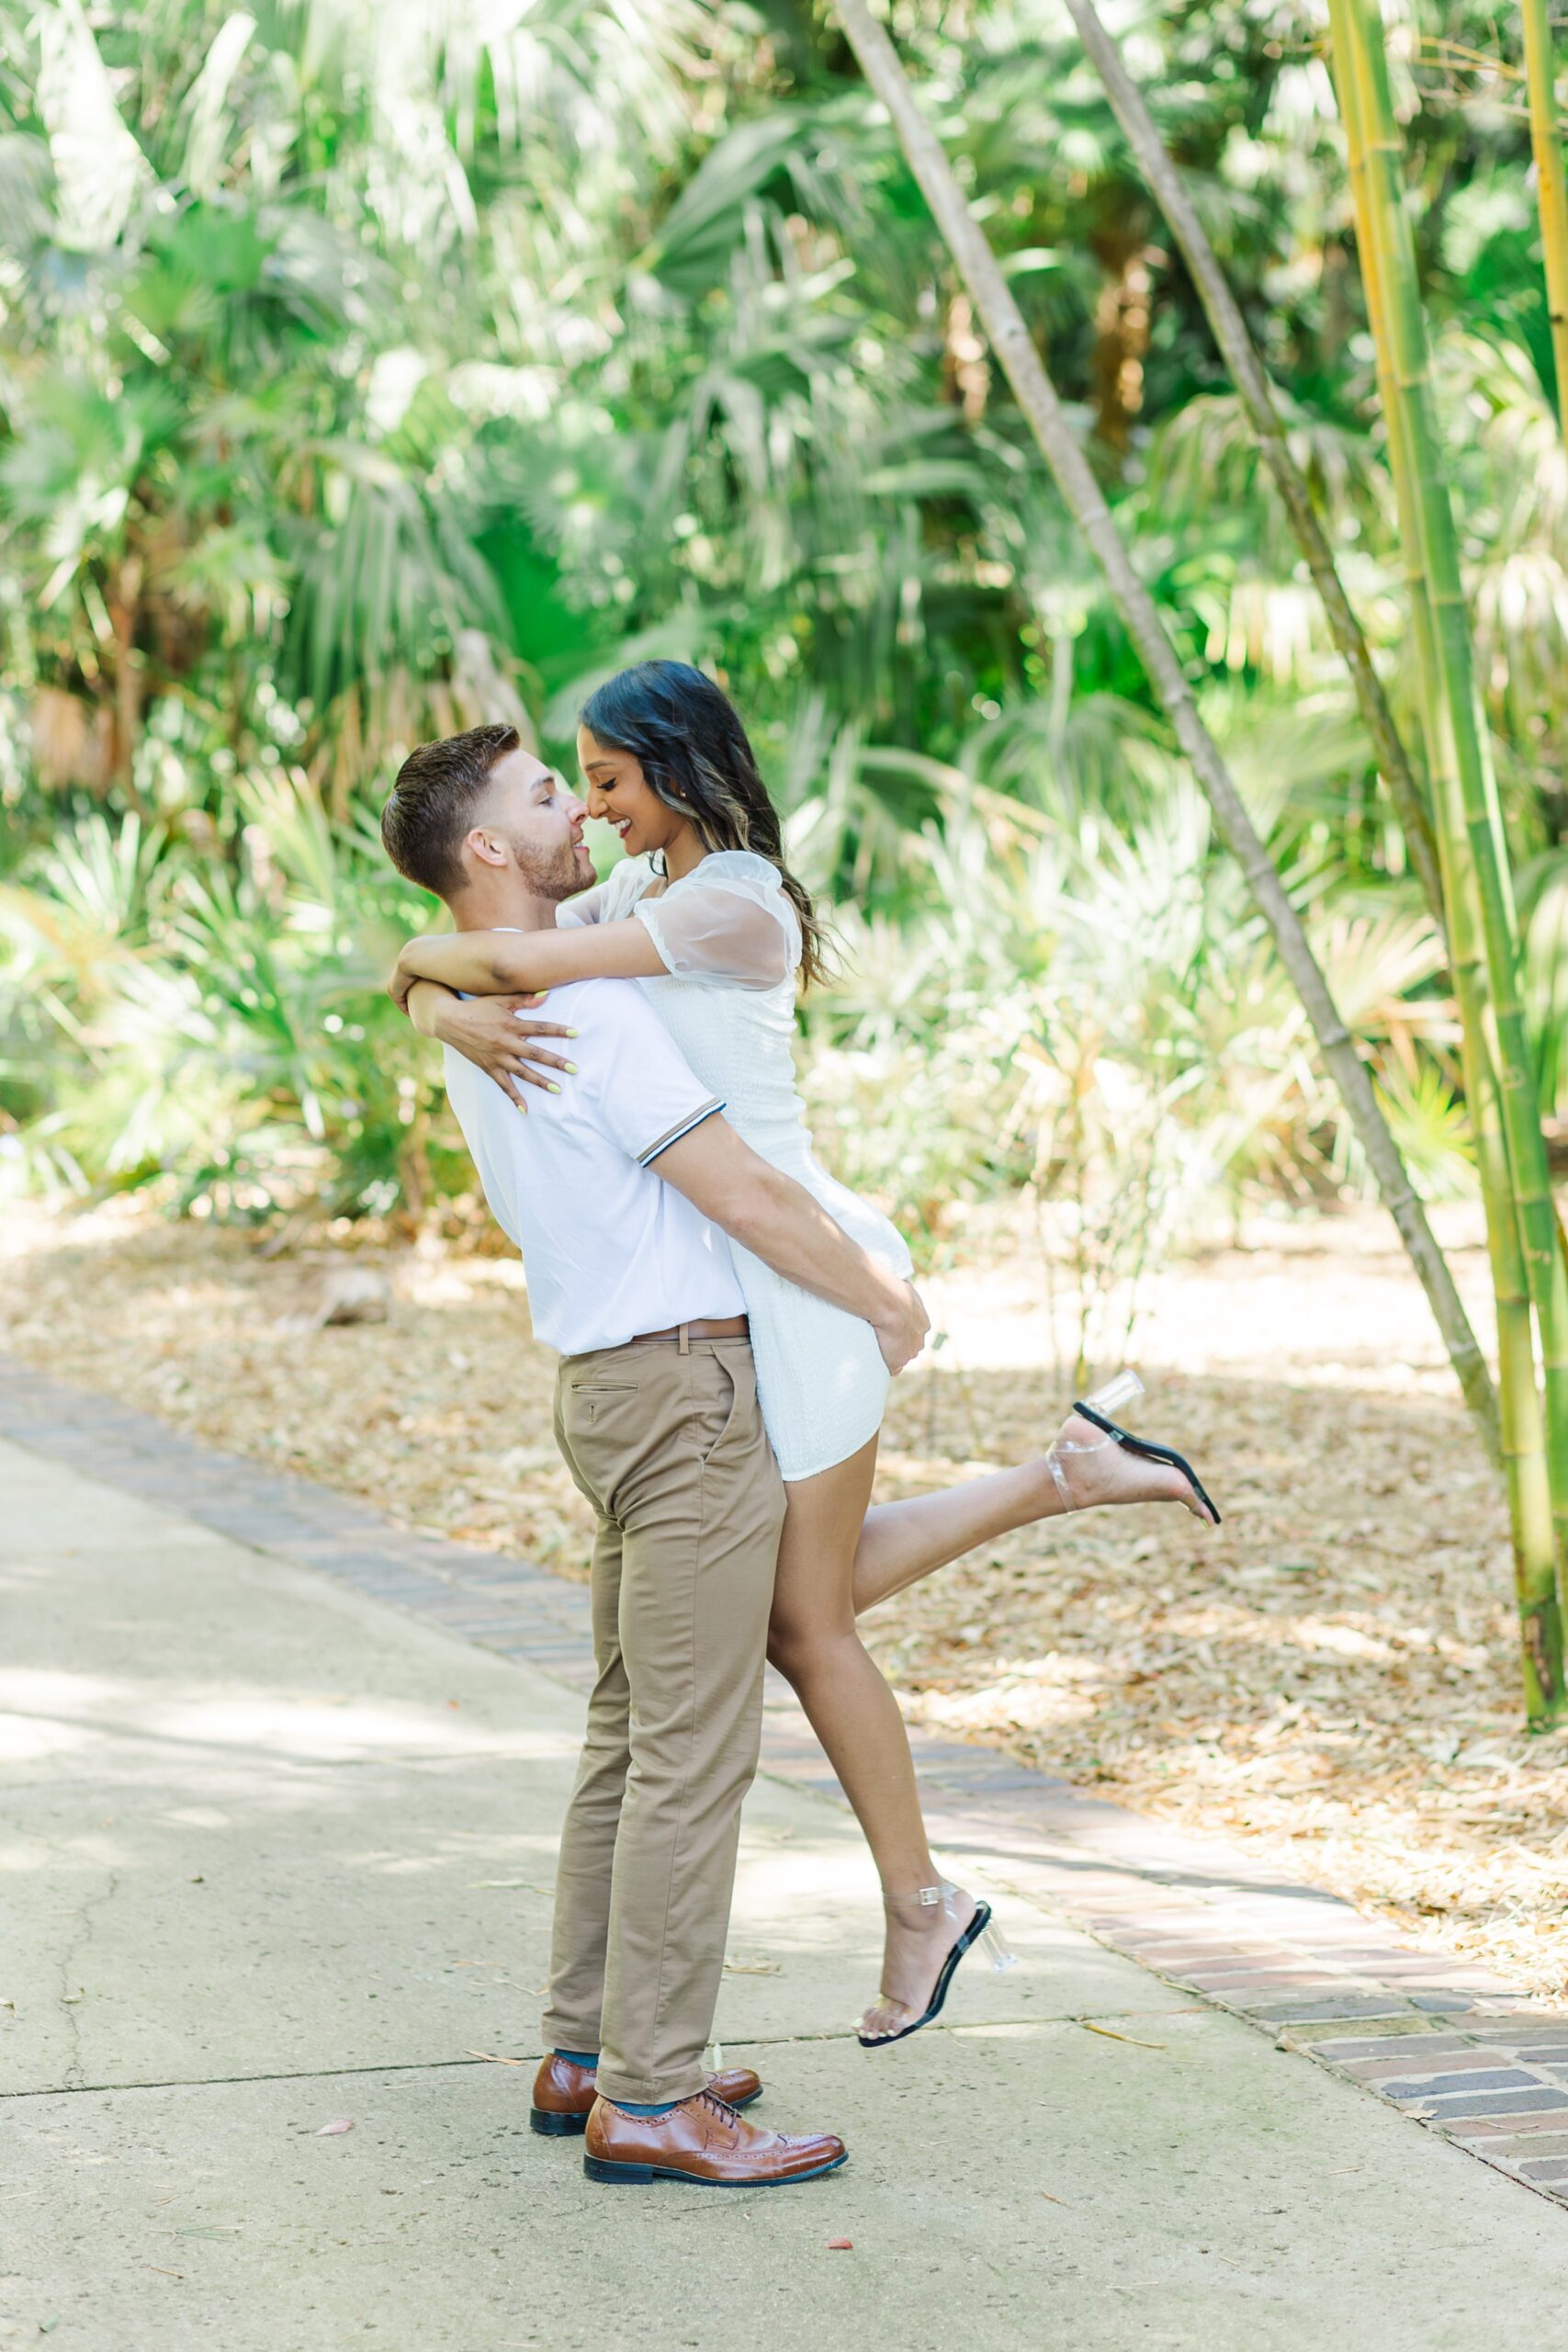 Guy lifts girl up in front of large bamboo for their engagement photos at Leu Gardens in Orlando, Florida